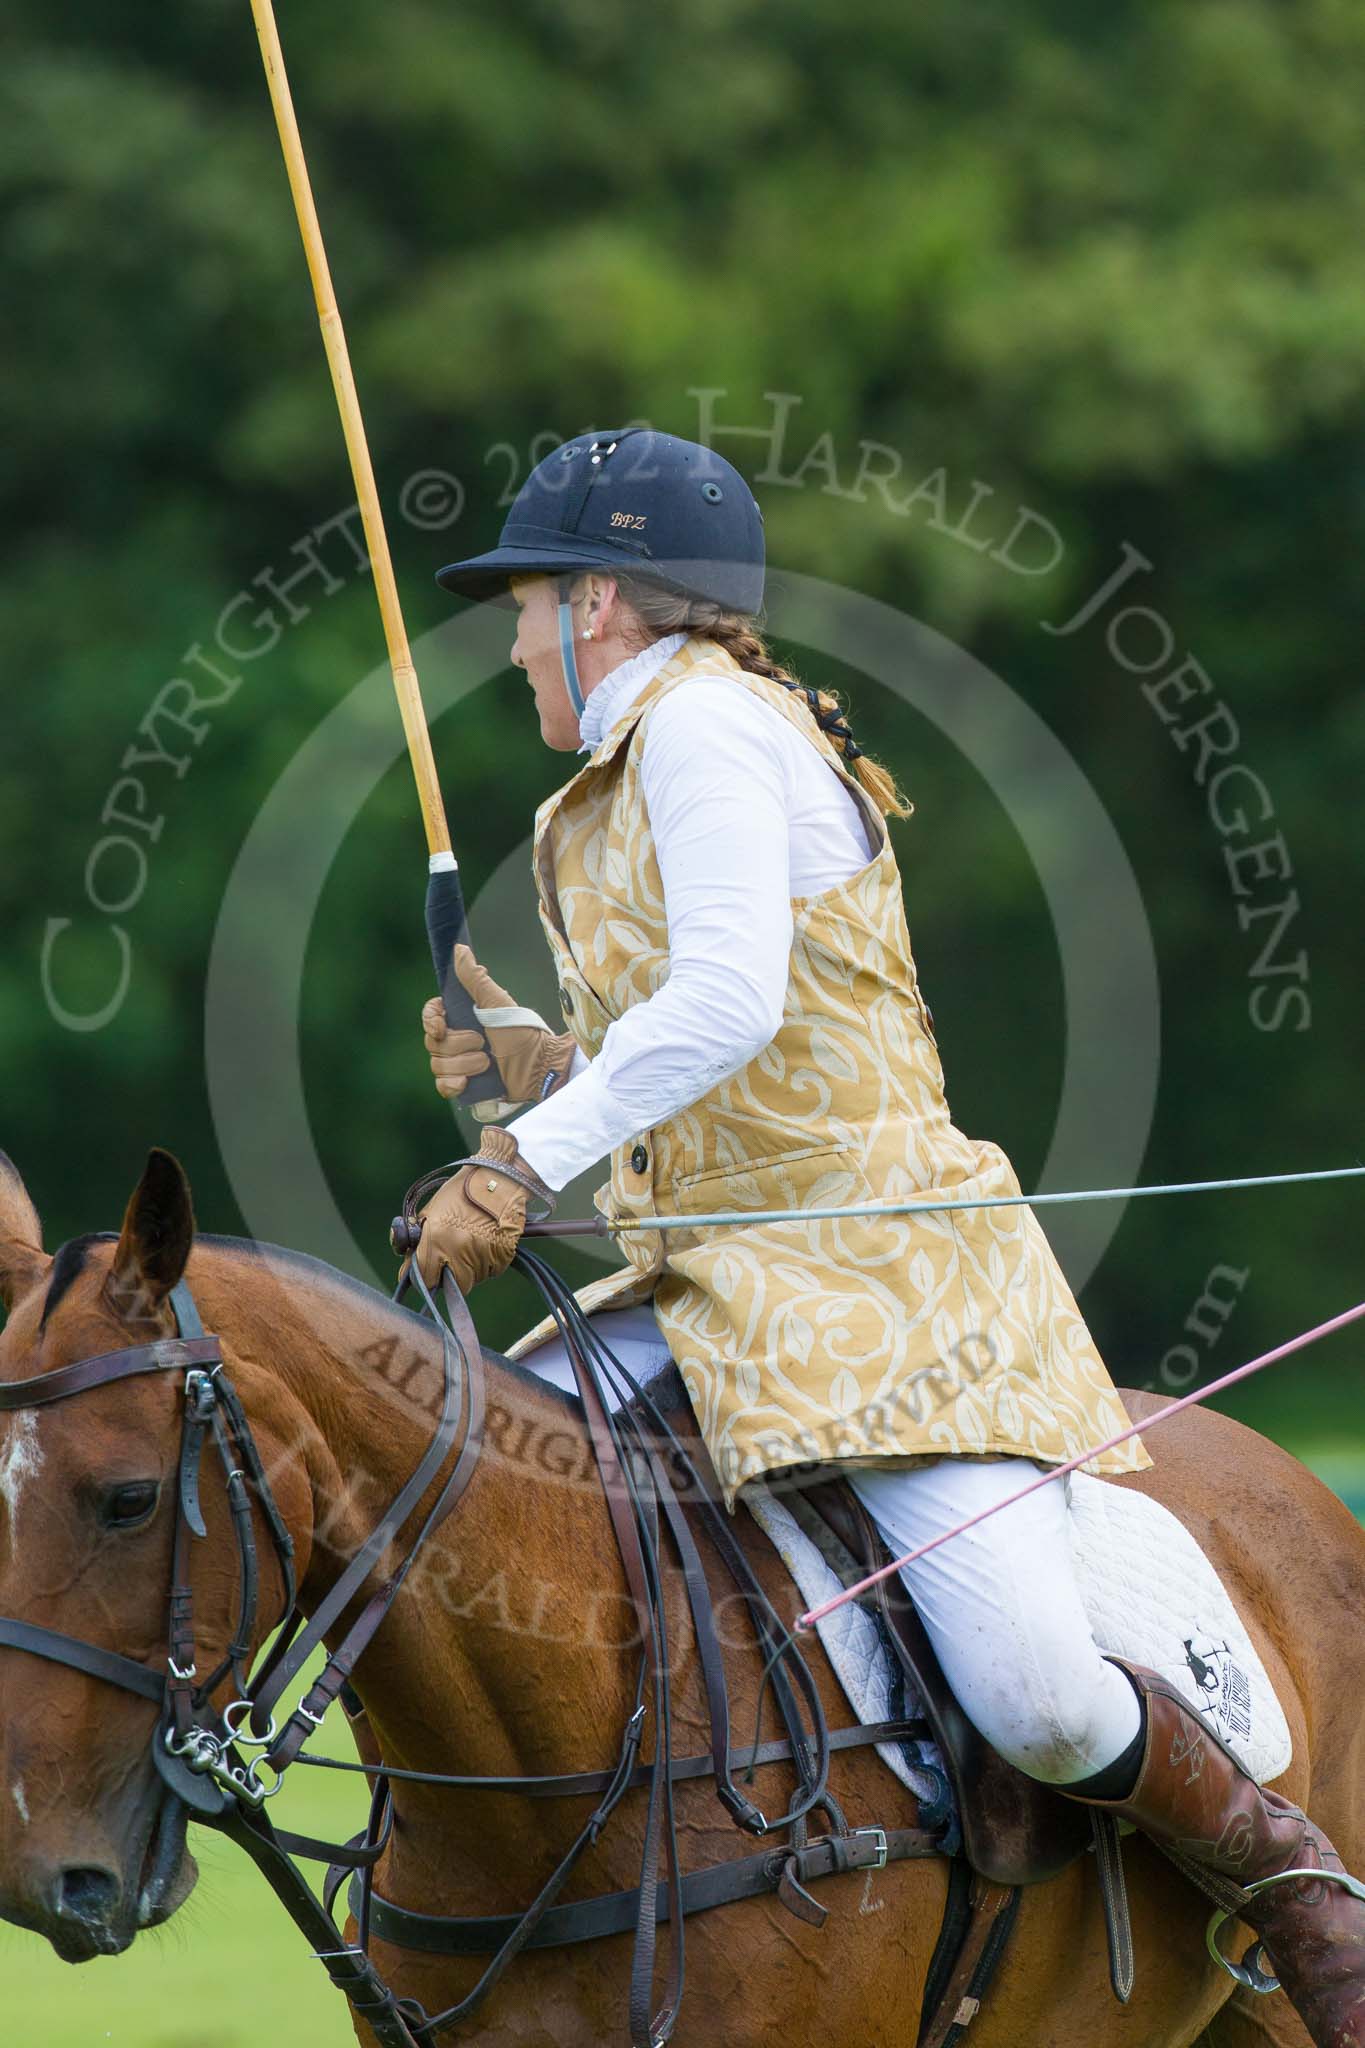 7th Heritage Polo Cup semi-finals: Barbara P Zingg..
Hurtwood Park Polo Club,
Ewhurst Green,
Surrey,
United Kingdom,
on 04 August 2012 at 13:33, image #148